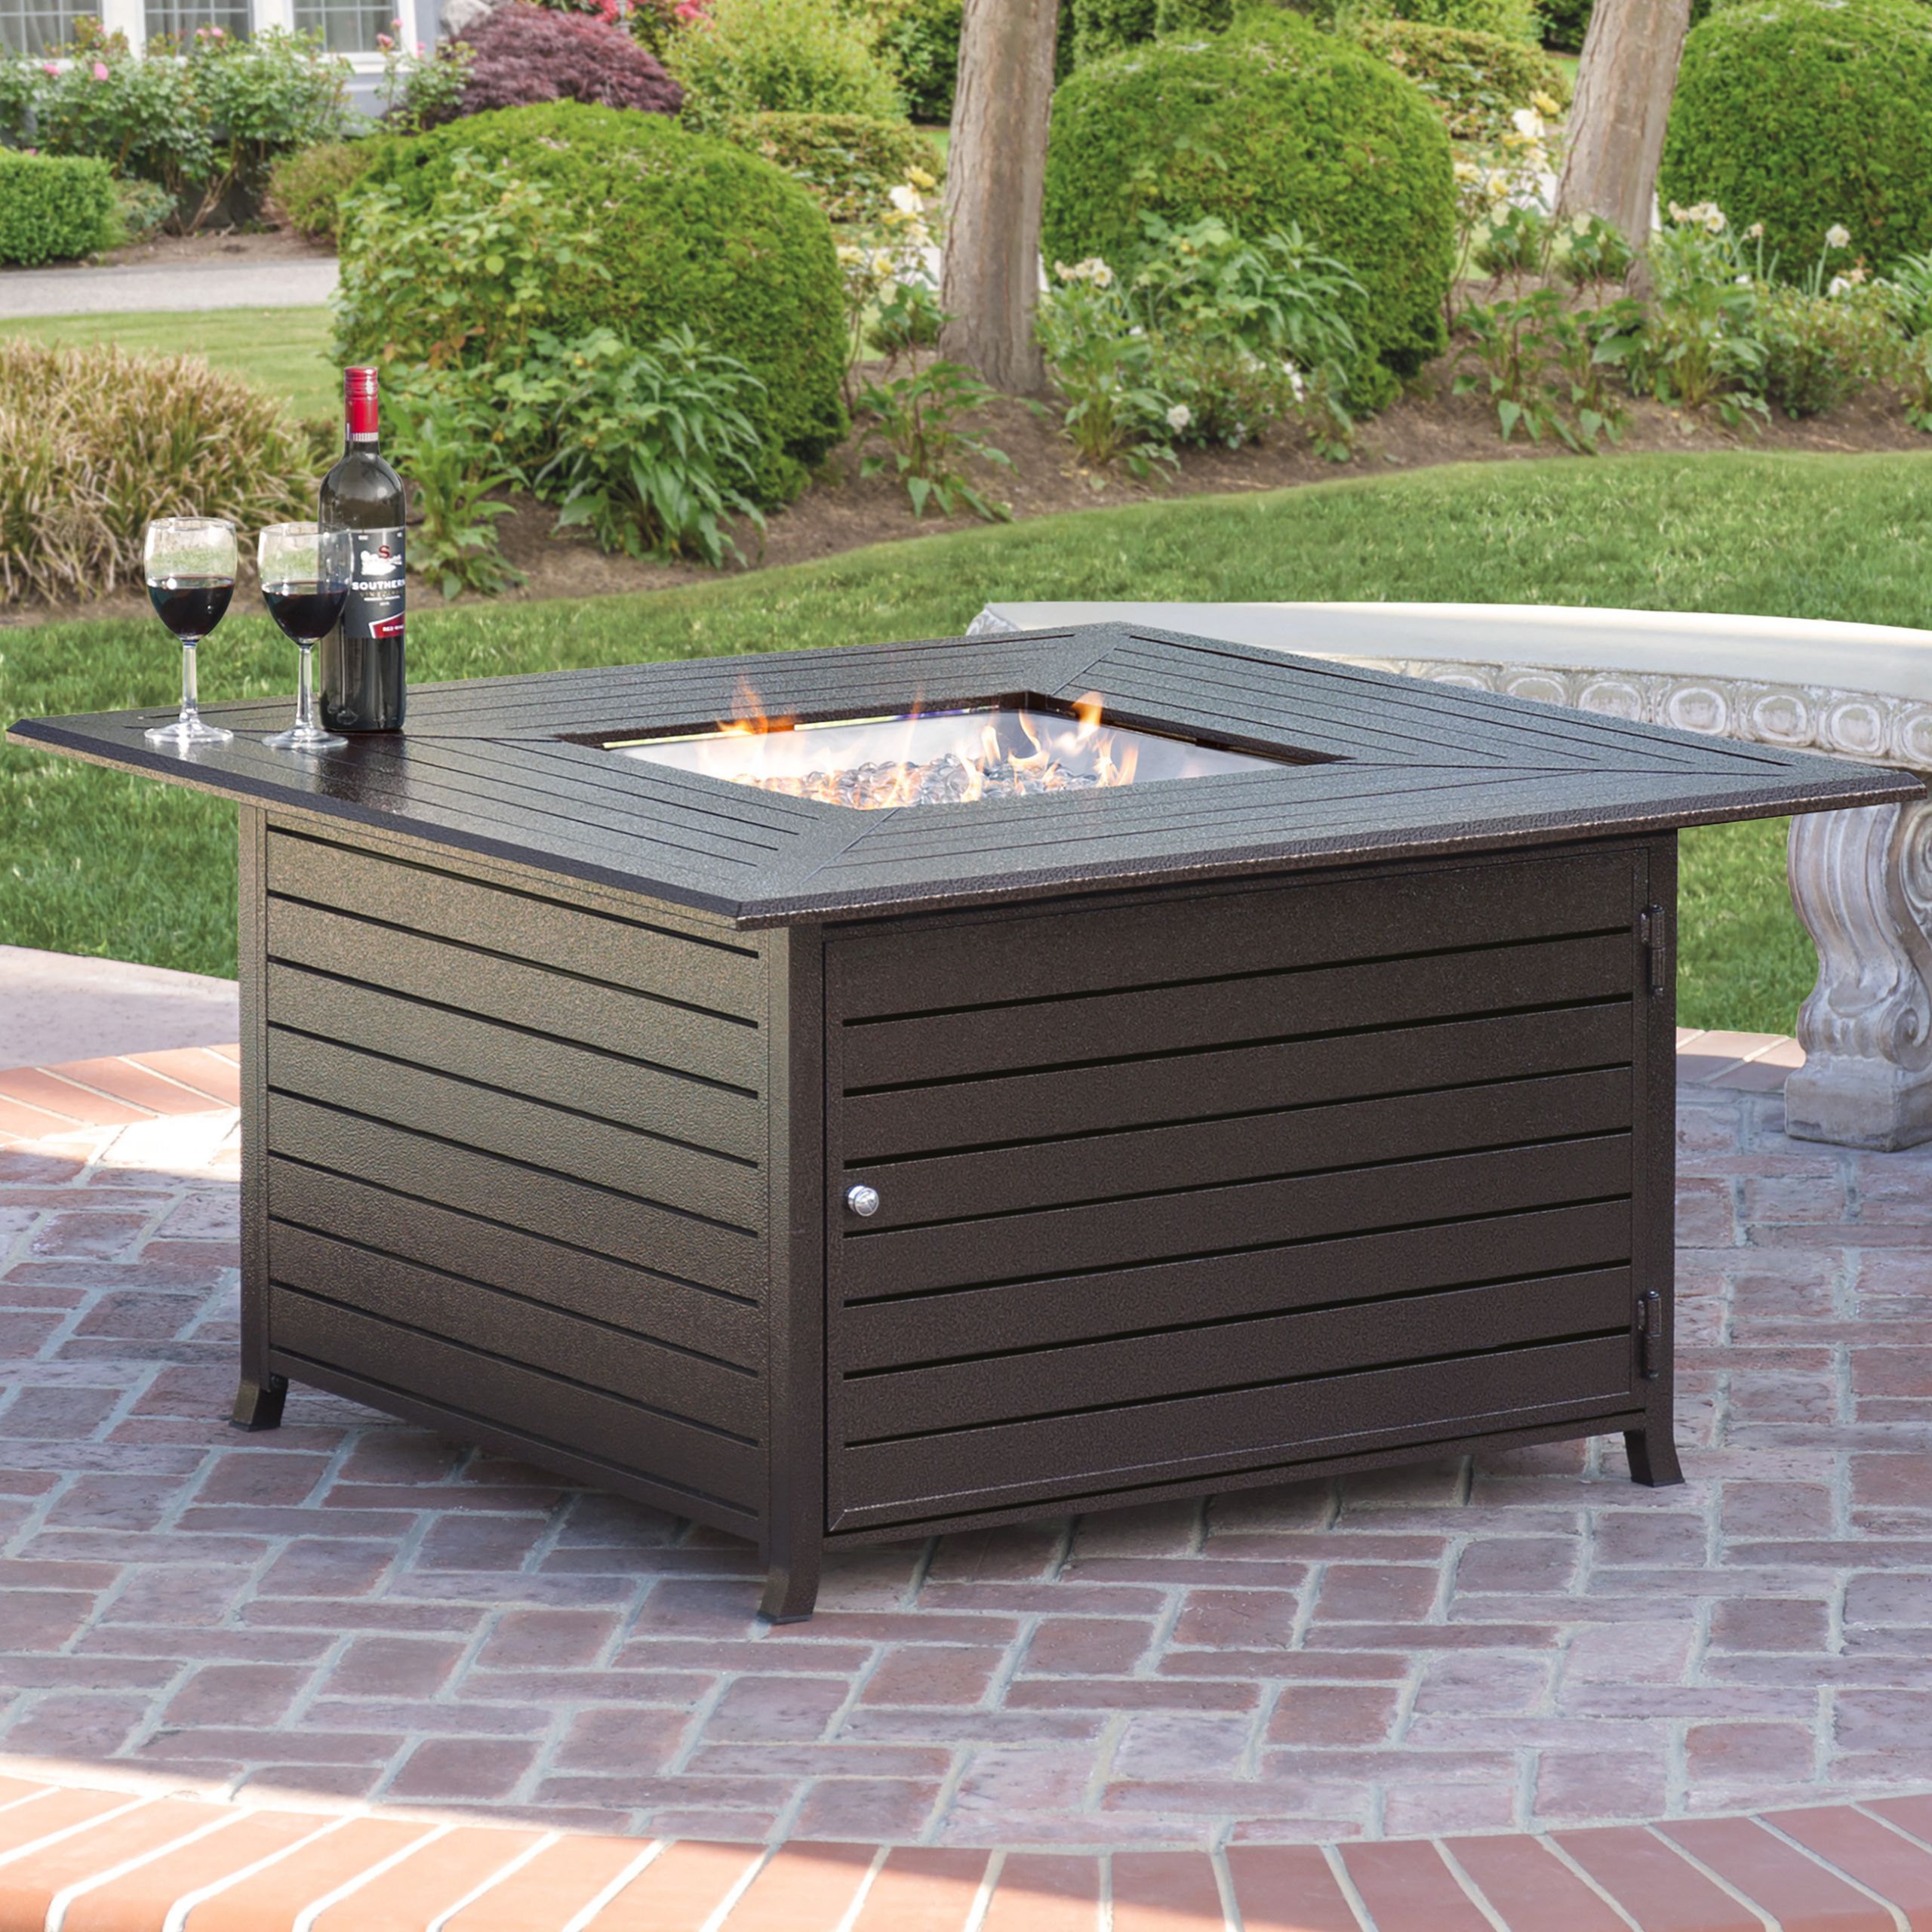 Patio Table With Firepit
 Best Choice Products Extruded Aluminum Gas Outdoor Fire